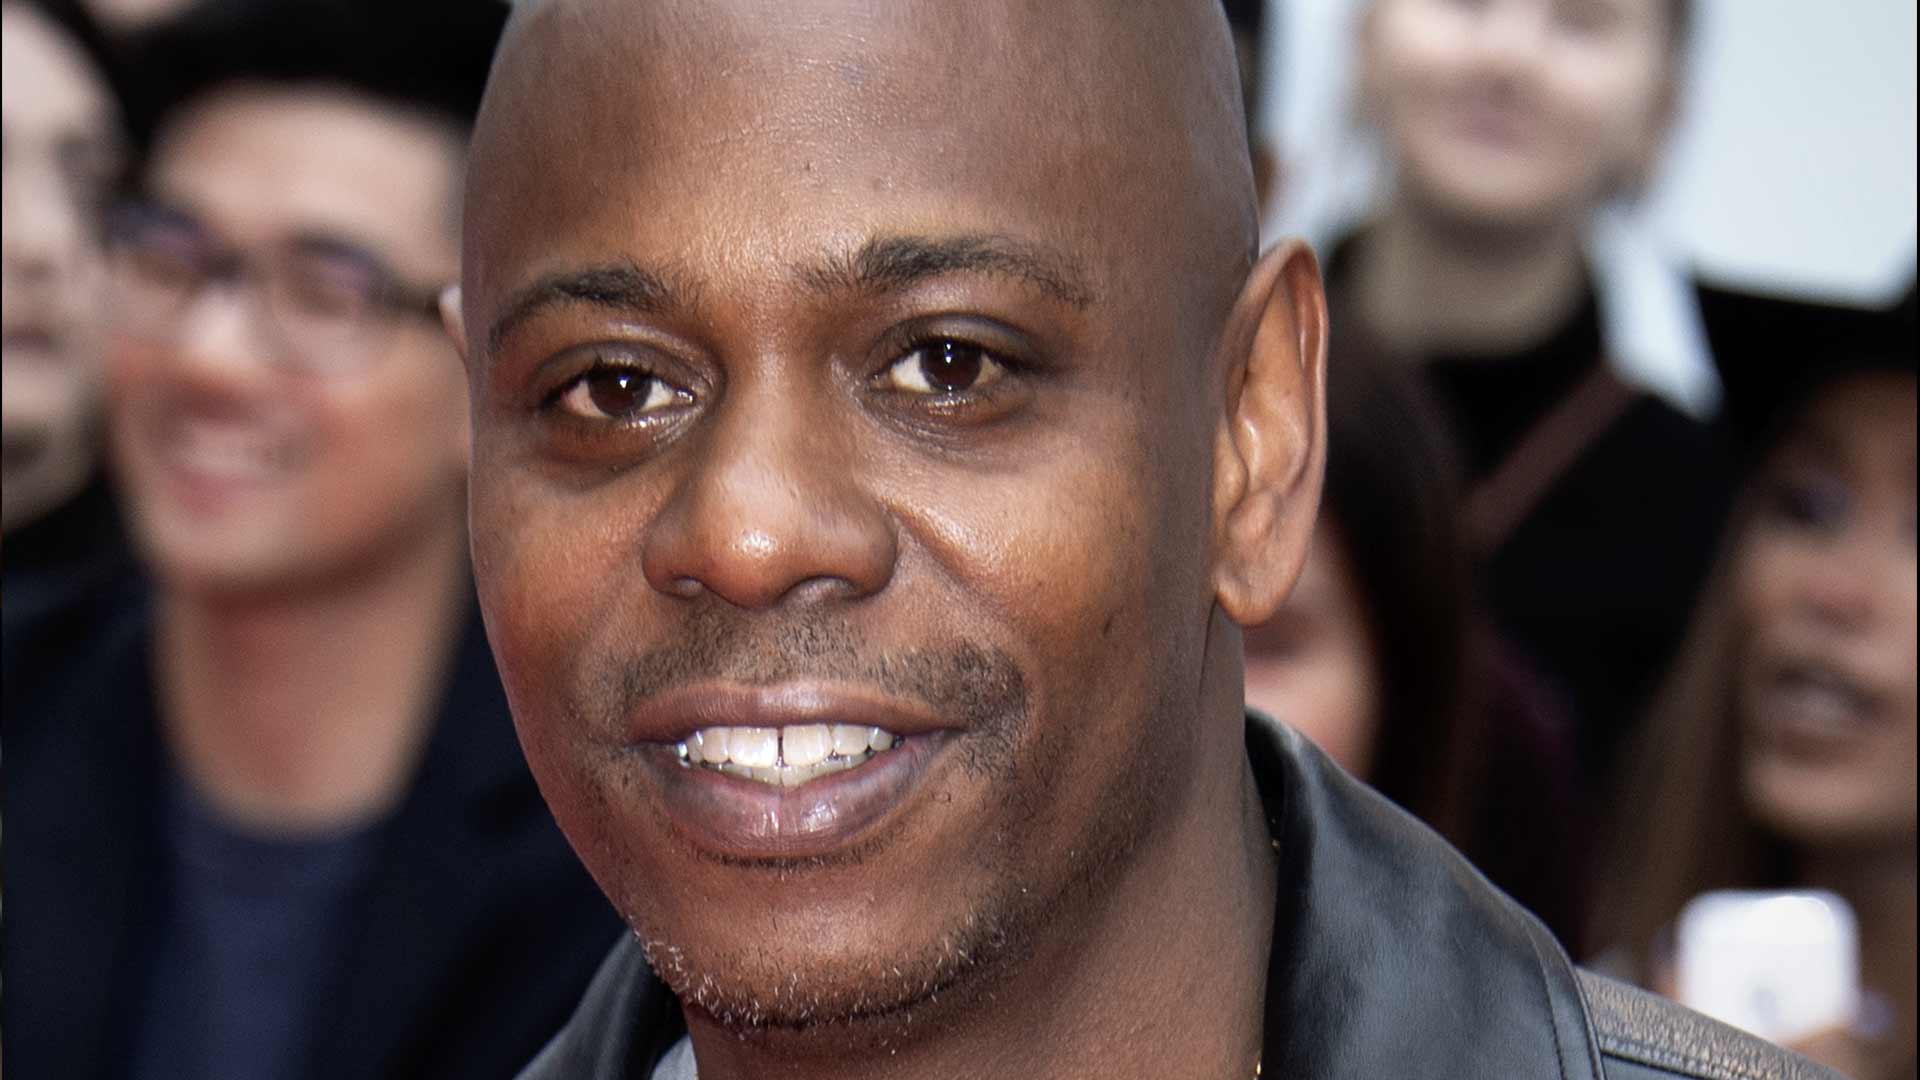 Dave Chappelle Scores Legal Victory Against Man Who Threw Banana Peel at Him During Show